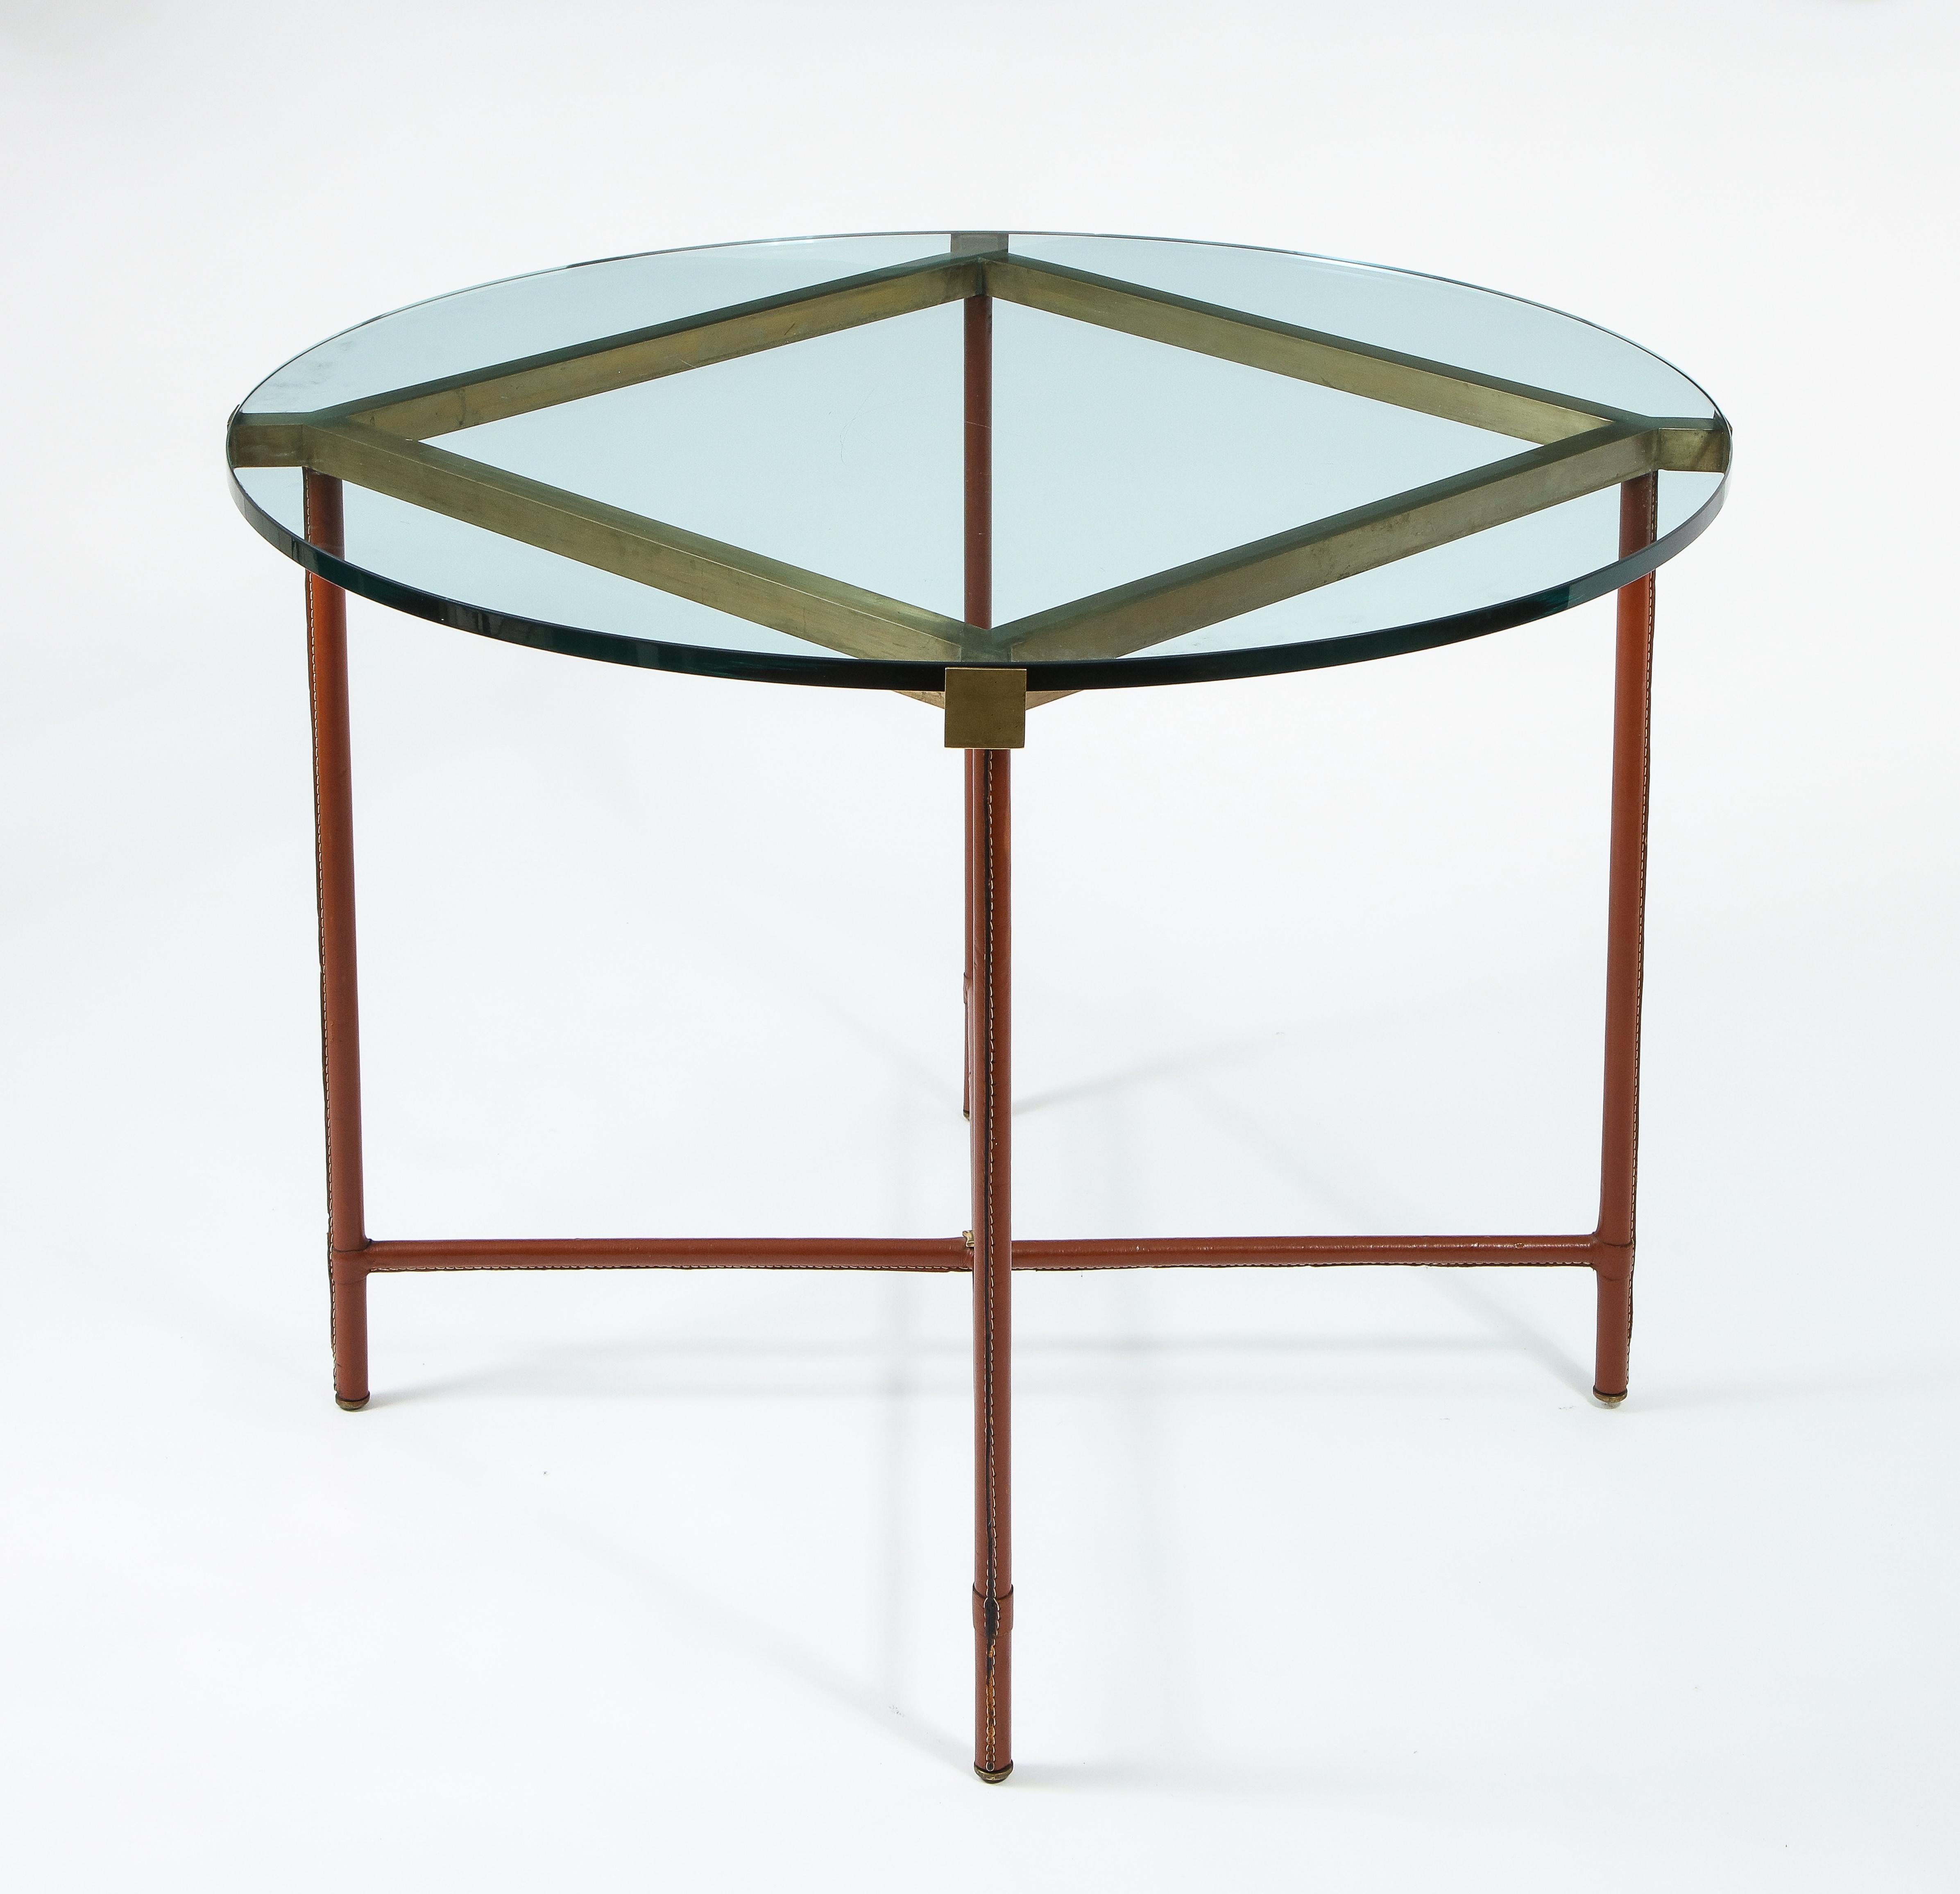 Jacques Adnet Center Table in Stitched Leather, Bronze and Gllass, France, 1950s For Sale 1